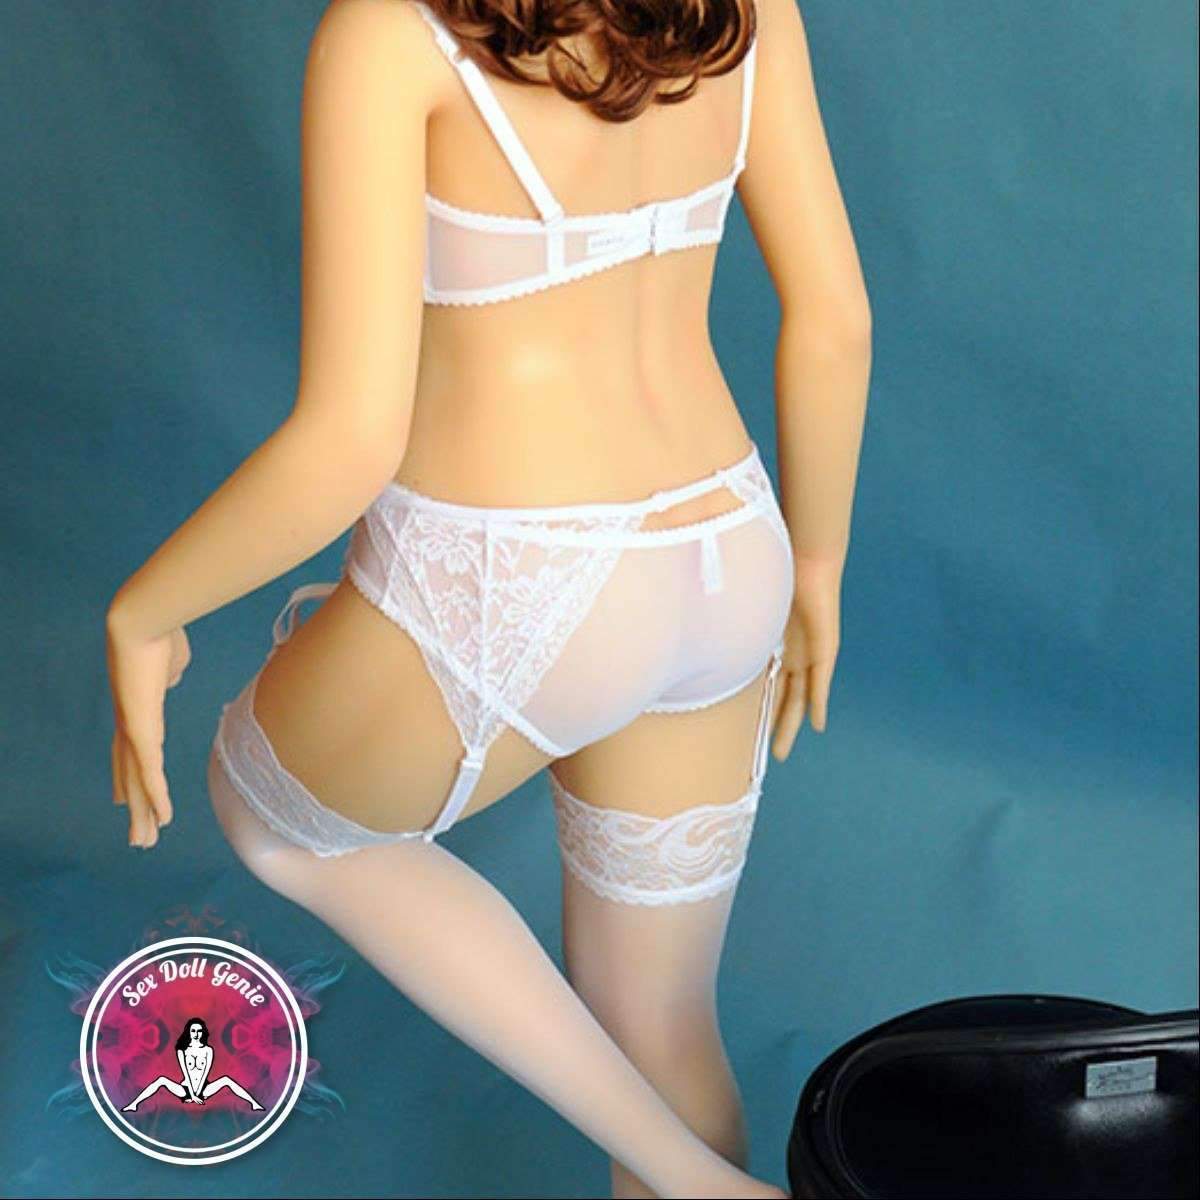 DS Doll - 158cm - Mandy Head - Type 2 D Cup Silicone Doll-21